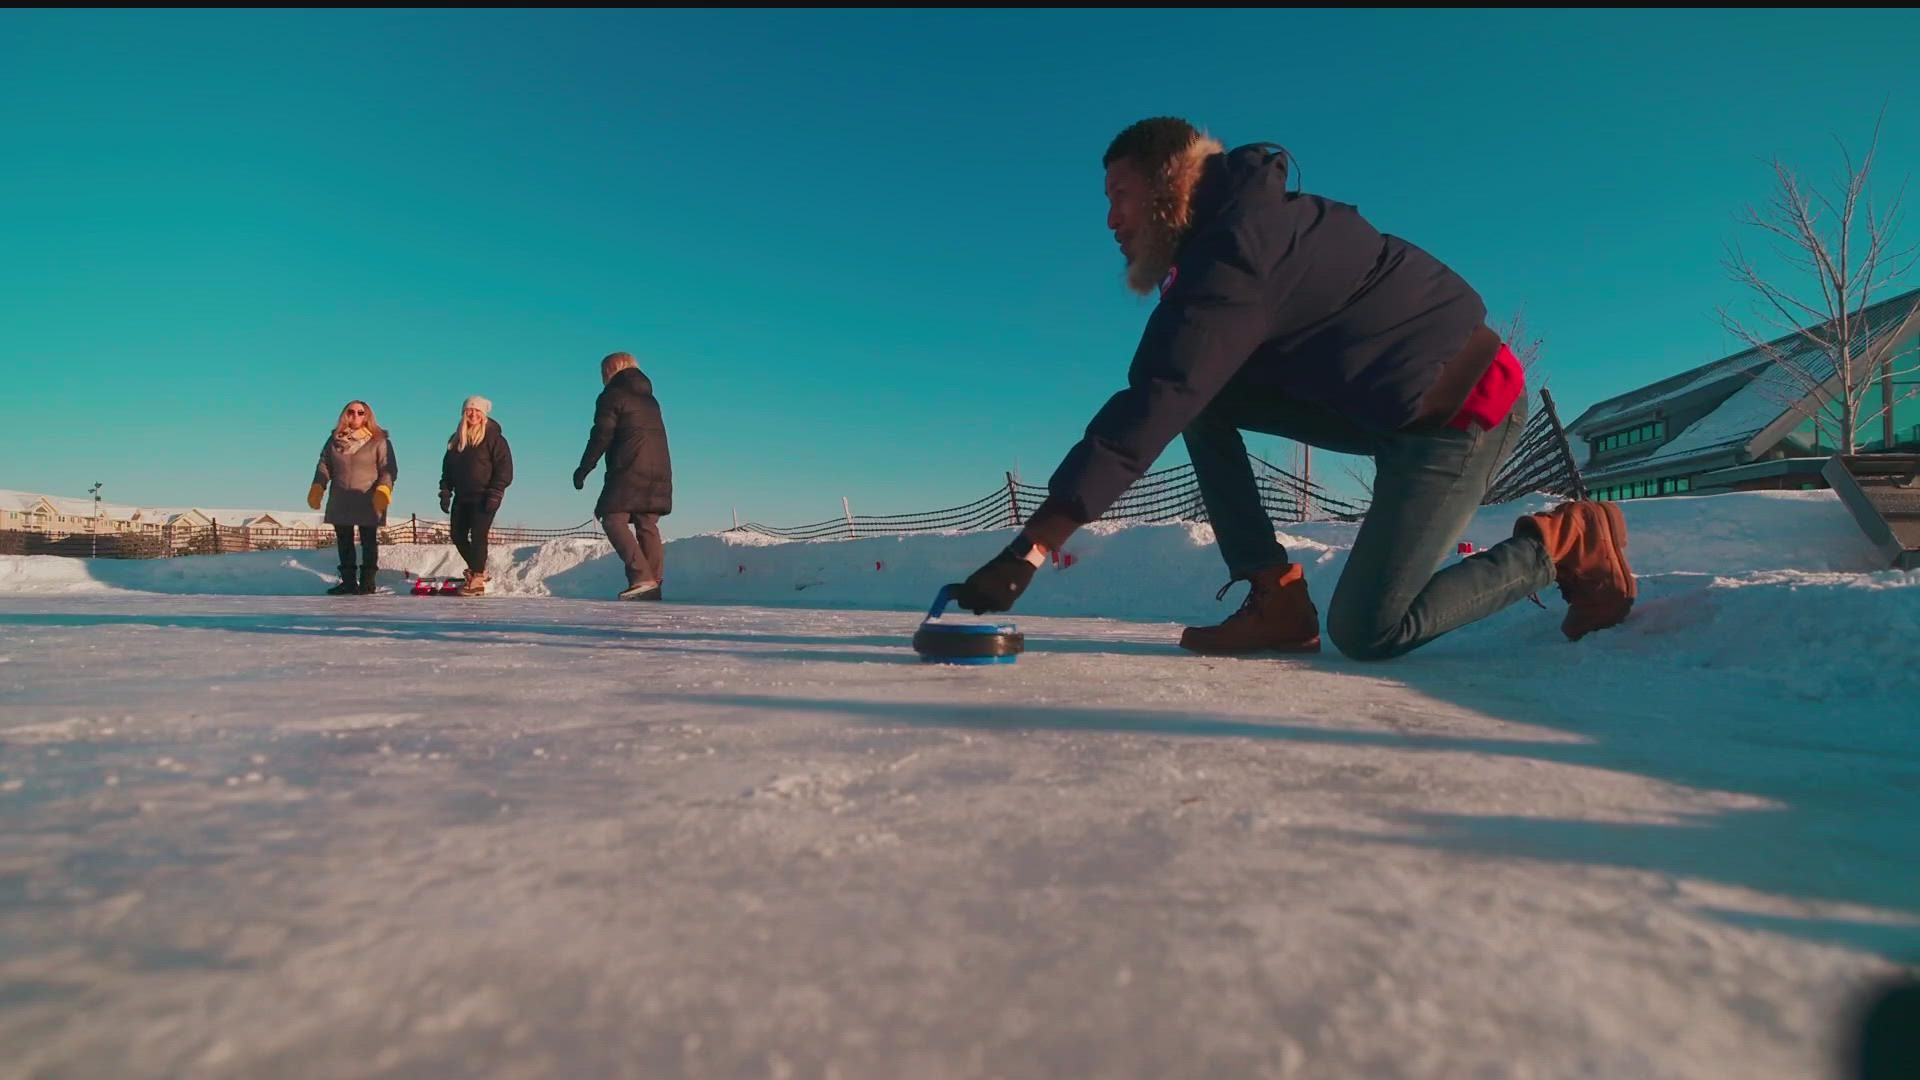 An outdoor game created by our Canadian neighbors is trying to become an icy hit in the Twin Cities metro! Guy Brown decided to give Crokicurl a shot.